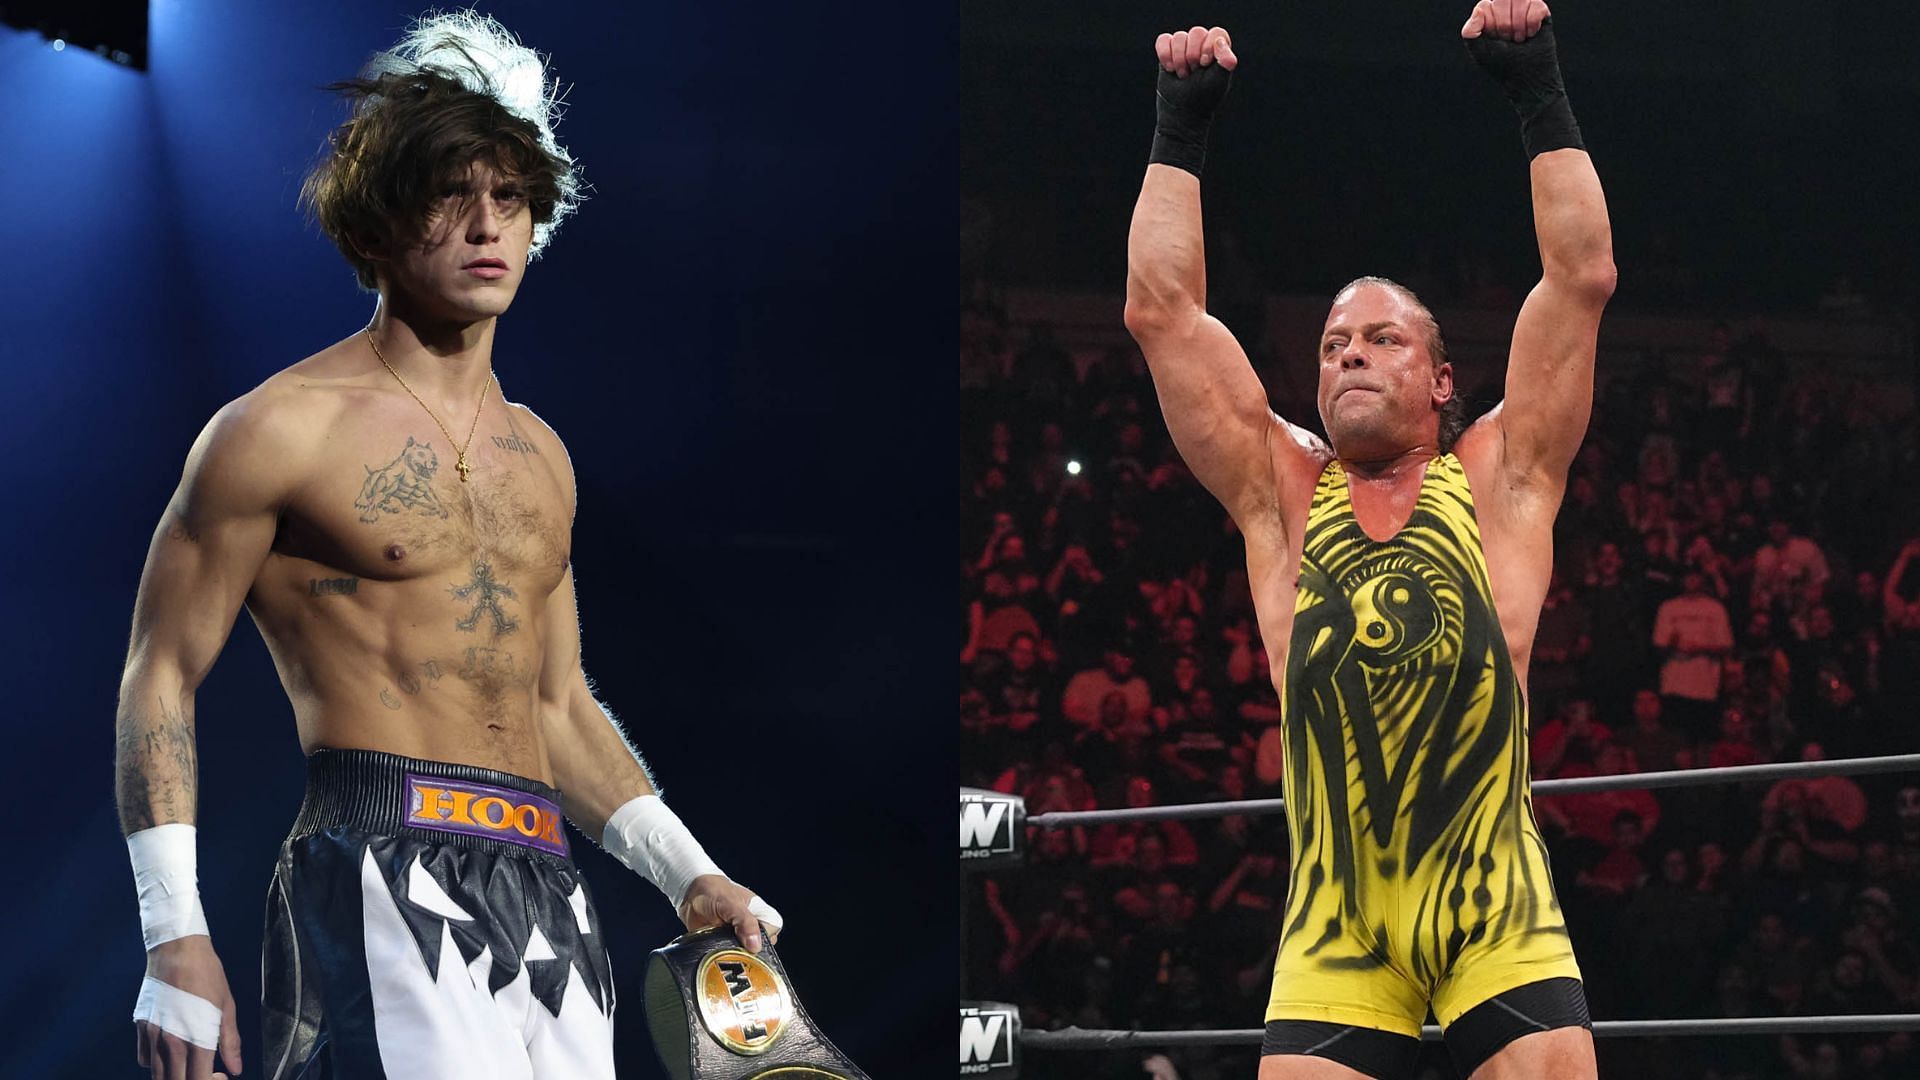 Rob Van Dam and Hook have teamed up with each other in AEW on multiple occasions [Photos courtesy of AEW